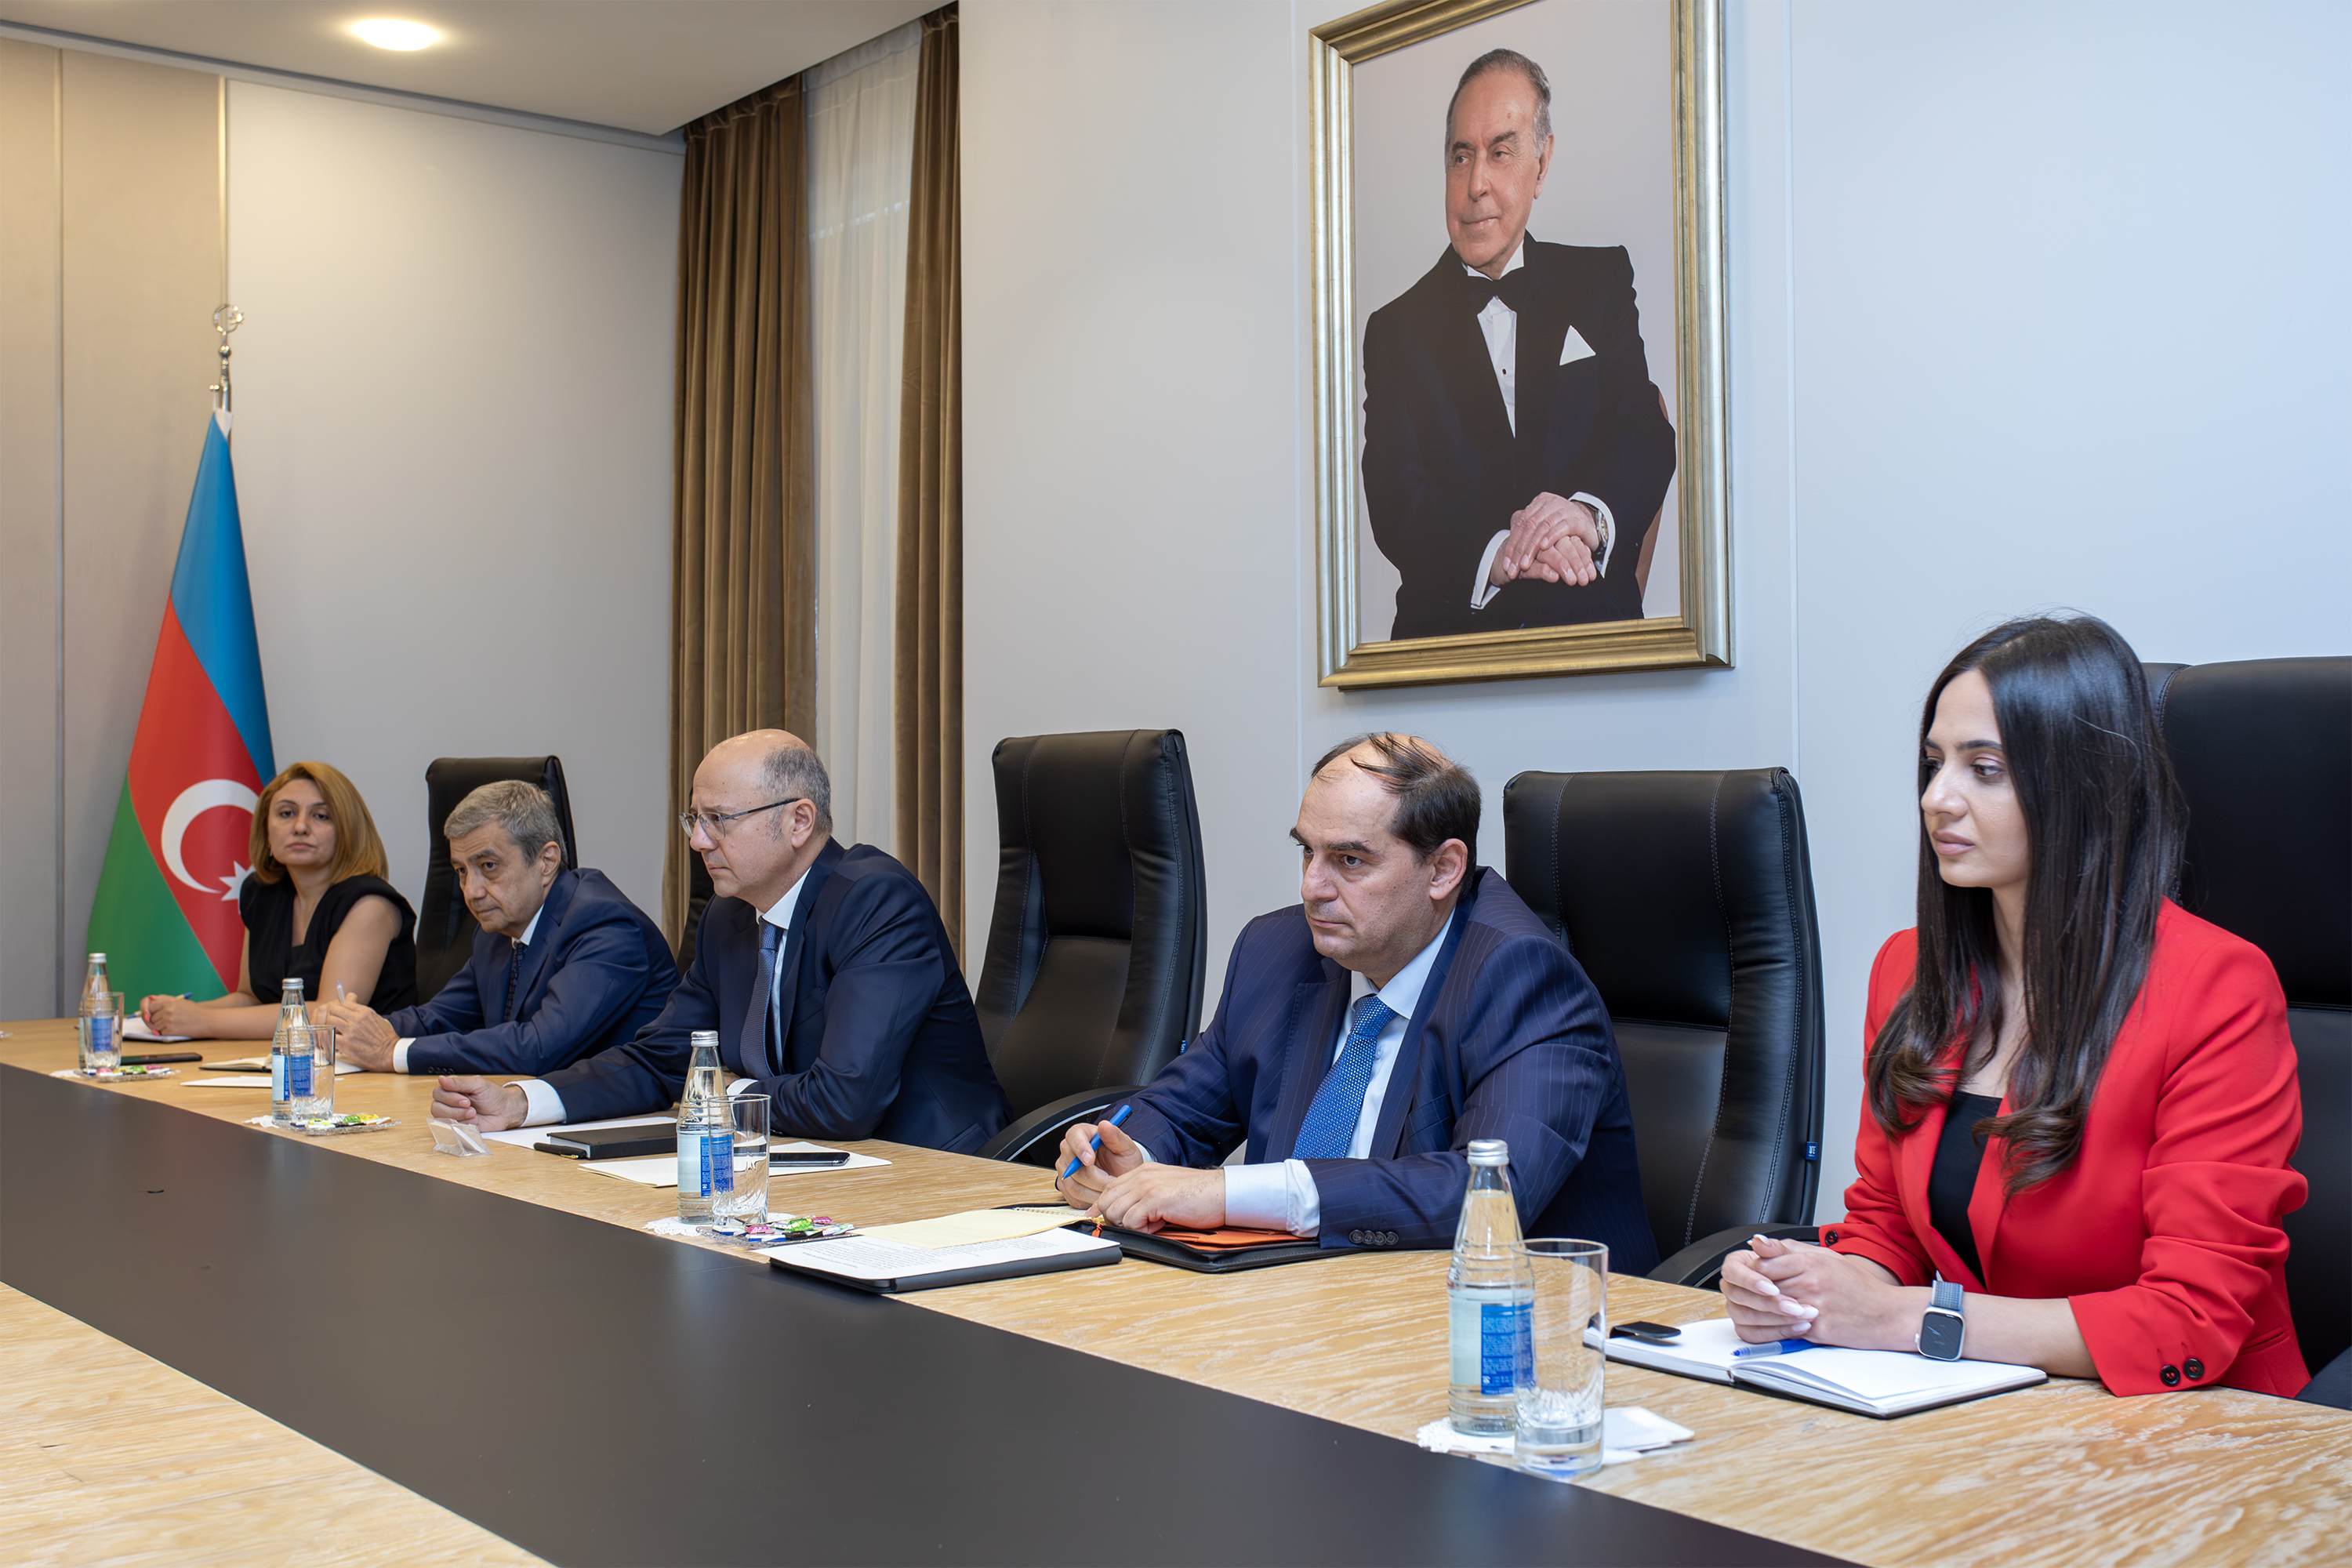 Minister of Energy met with Chief Executive Officer of Total Energies